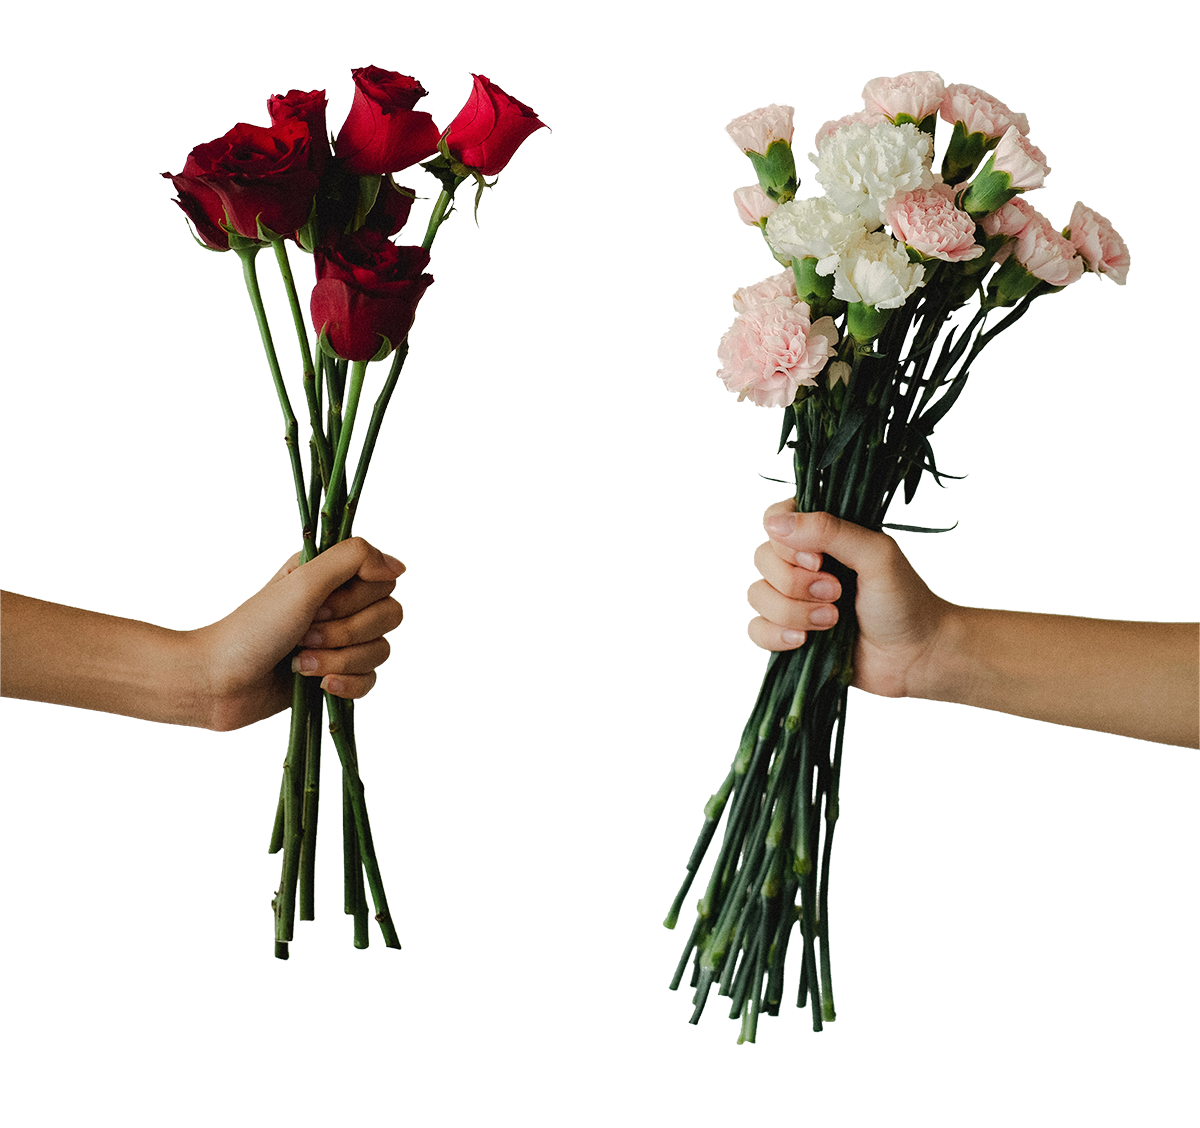 hands with flowers image, hands with flowers png, transparent hands with flowers png, hands with flowers PNG image, hands with flowers, hands with flowers png hd images download